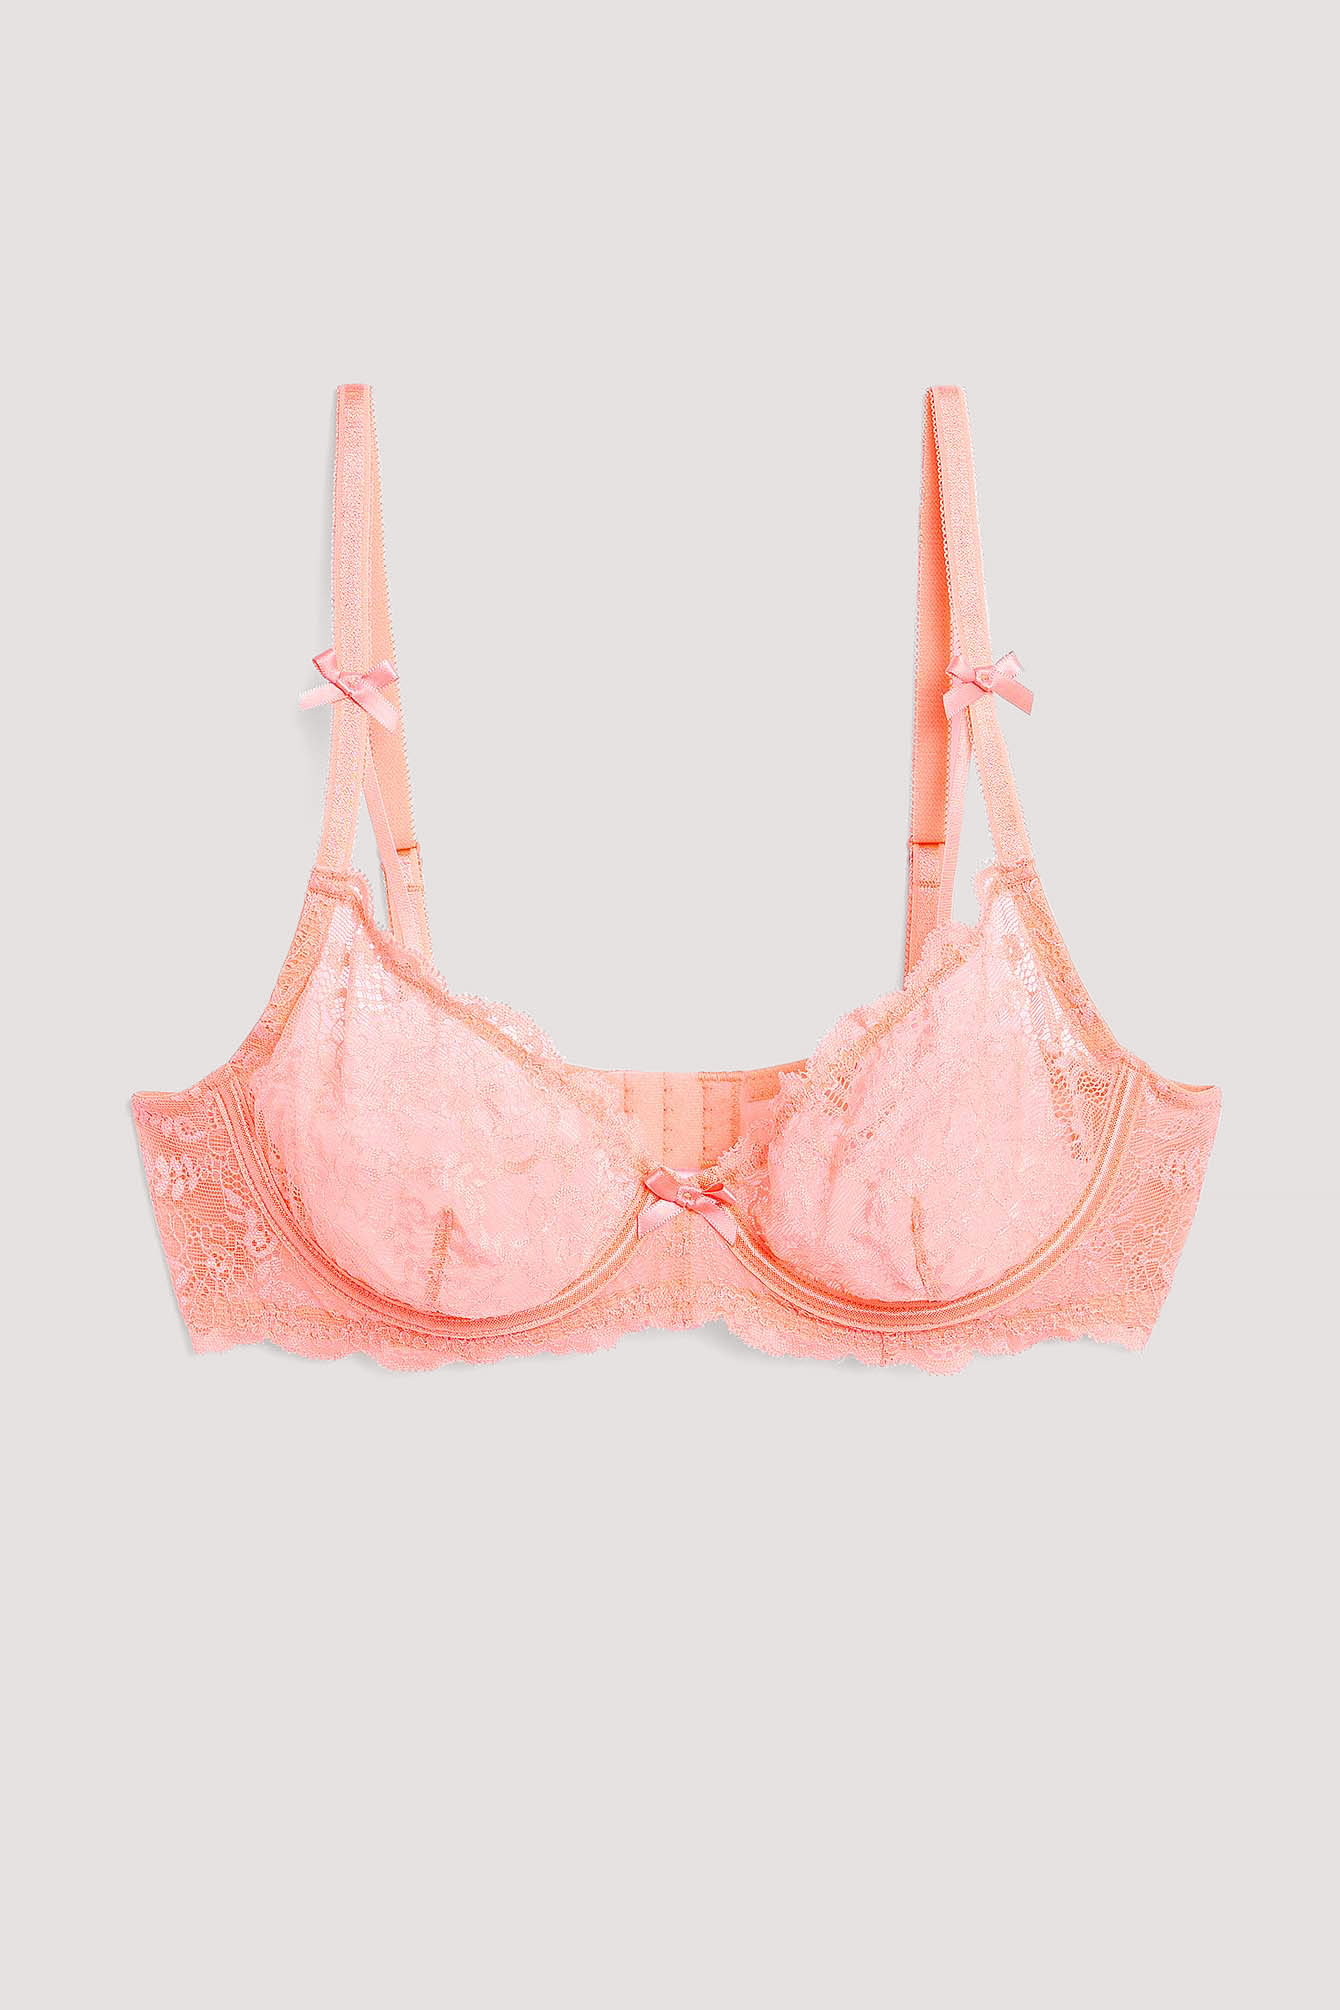 Victoria Secret NWOT PINK lace bra 34D. Lace bow in back snaps on or off.